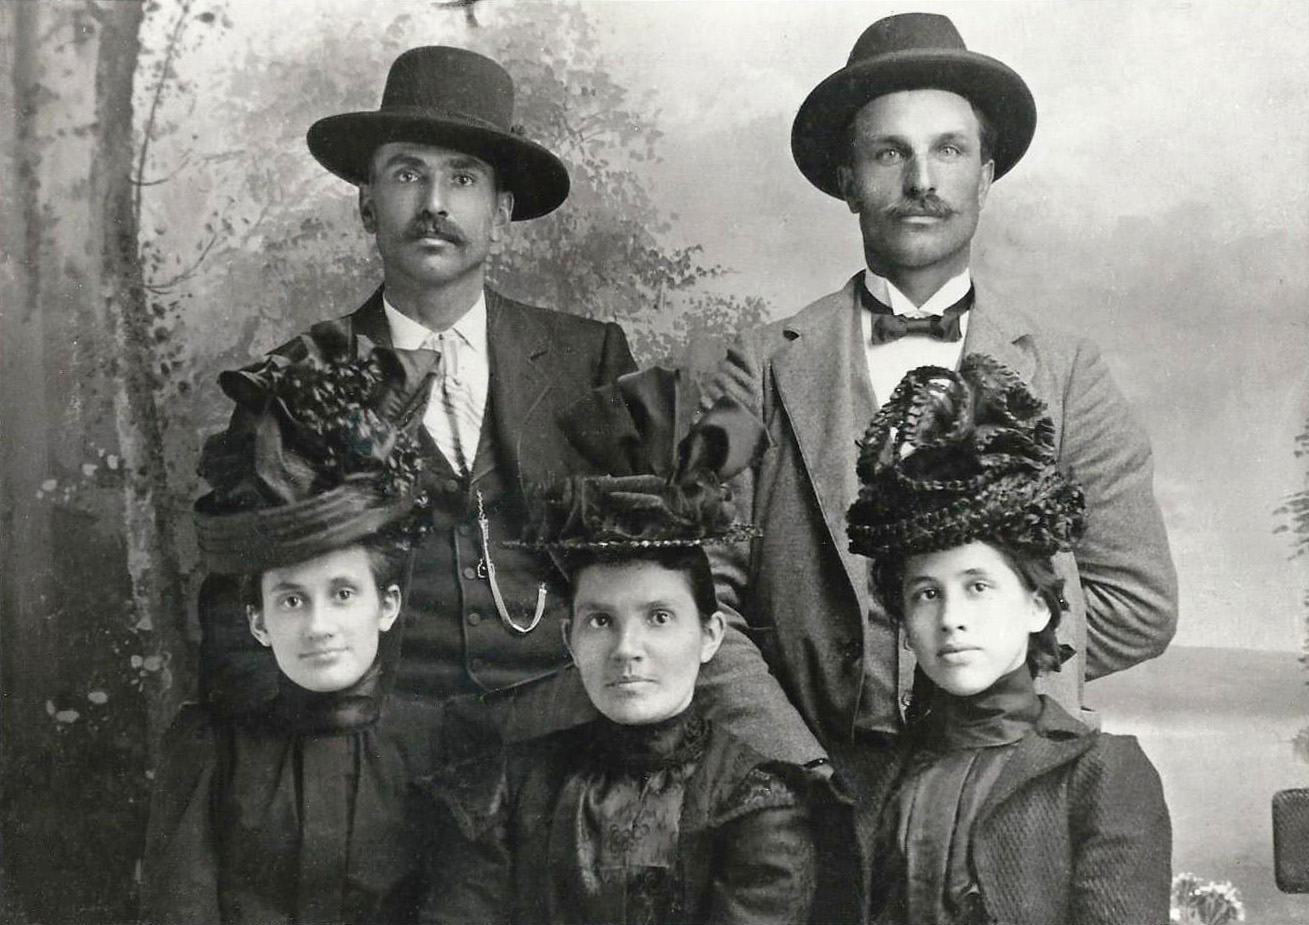 Studio portrait of my grandfather, William Haase, taken about 1910 in Deadwood,  South Dakota. He is at left rear, with an unidentified friend to his left.  The three ladies in front are also unidentified, although family legend has it that two of them were "cousins" of Grandpa William. Uh-huh. William died in 1930 when my mother was only 8 years old, so most of the truth about this escapade has been left to conjecture. View full size.


